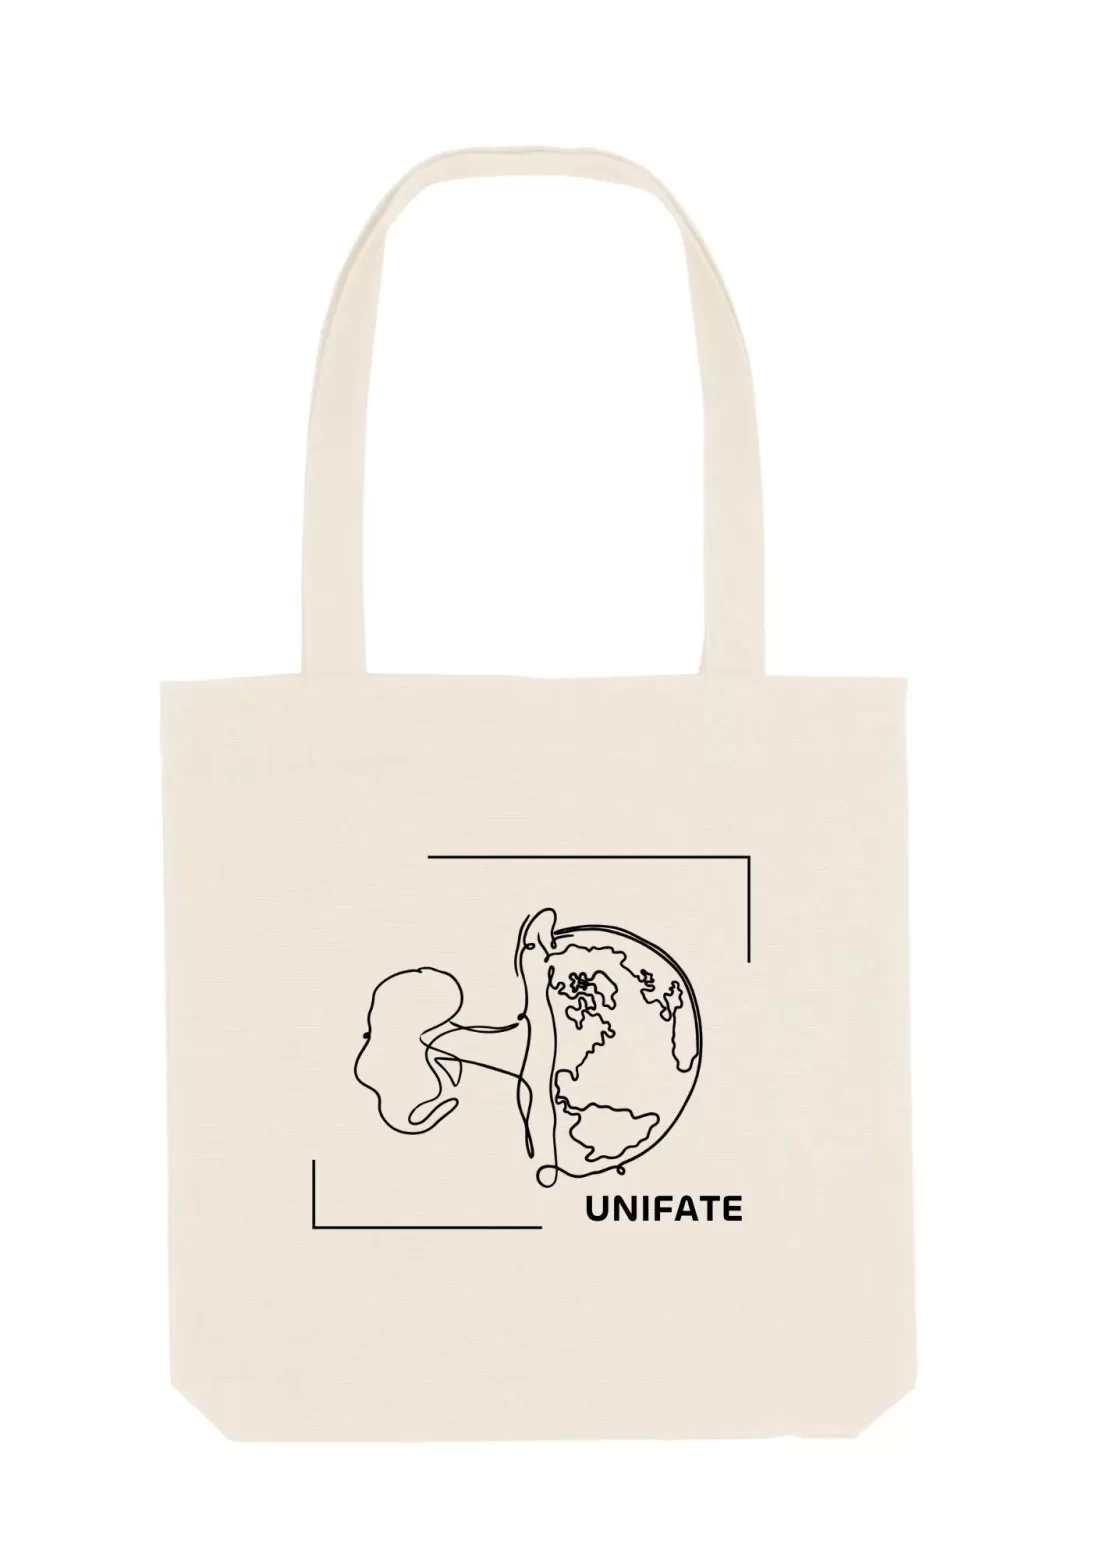 unifate-marque-responsable-rennes-collection-pollution-ete-tote-bag-blanc-recto